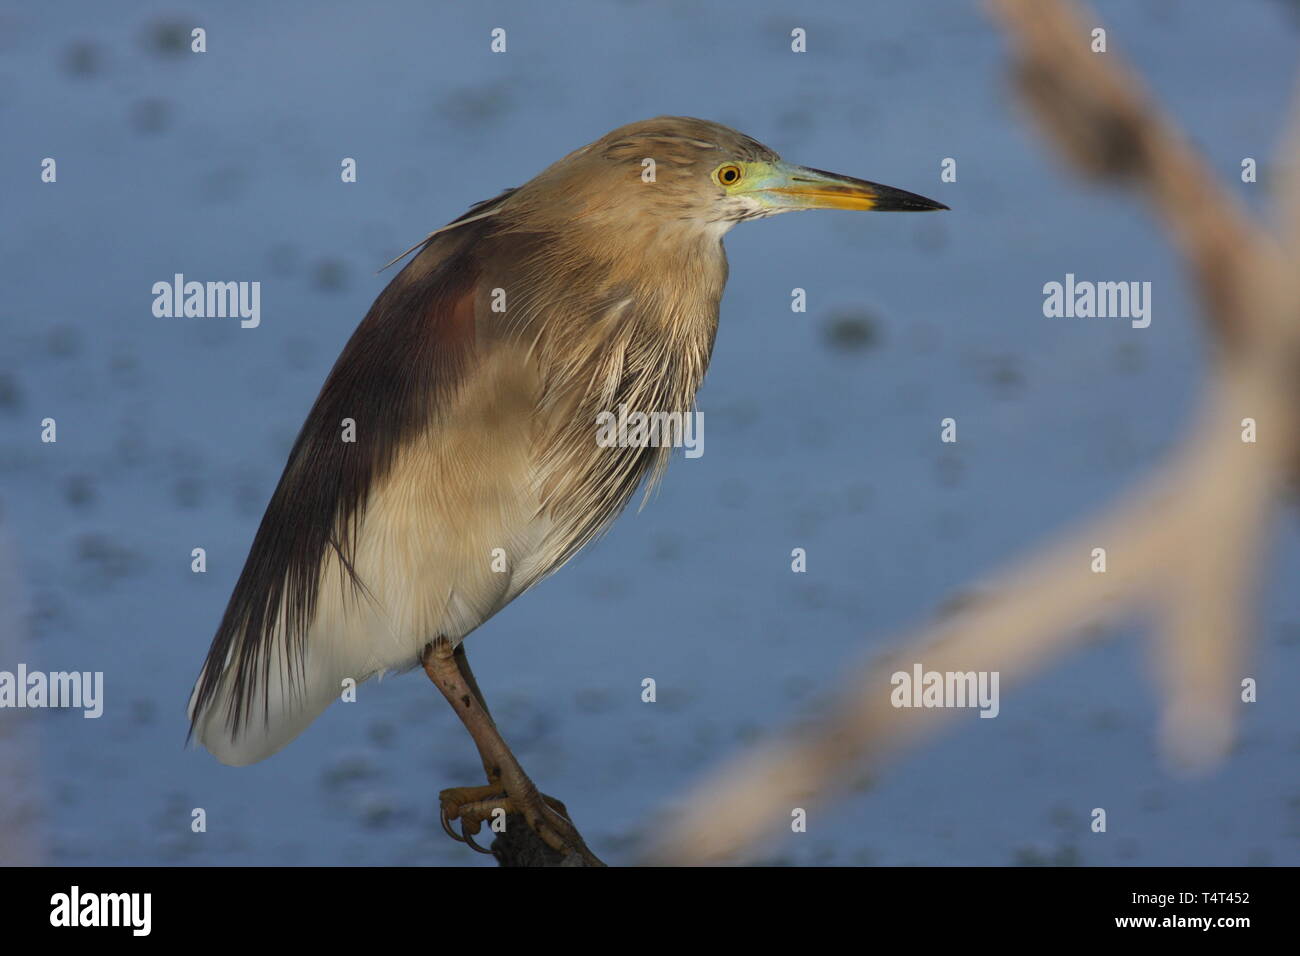 An Indian pond heron in winter, Keoladeo National Park, Rajasthan Stock Photo